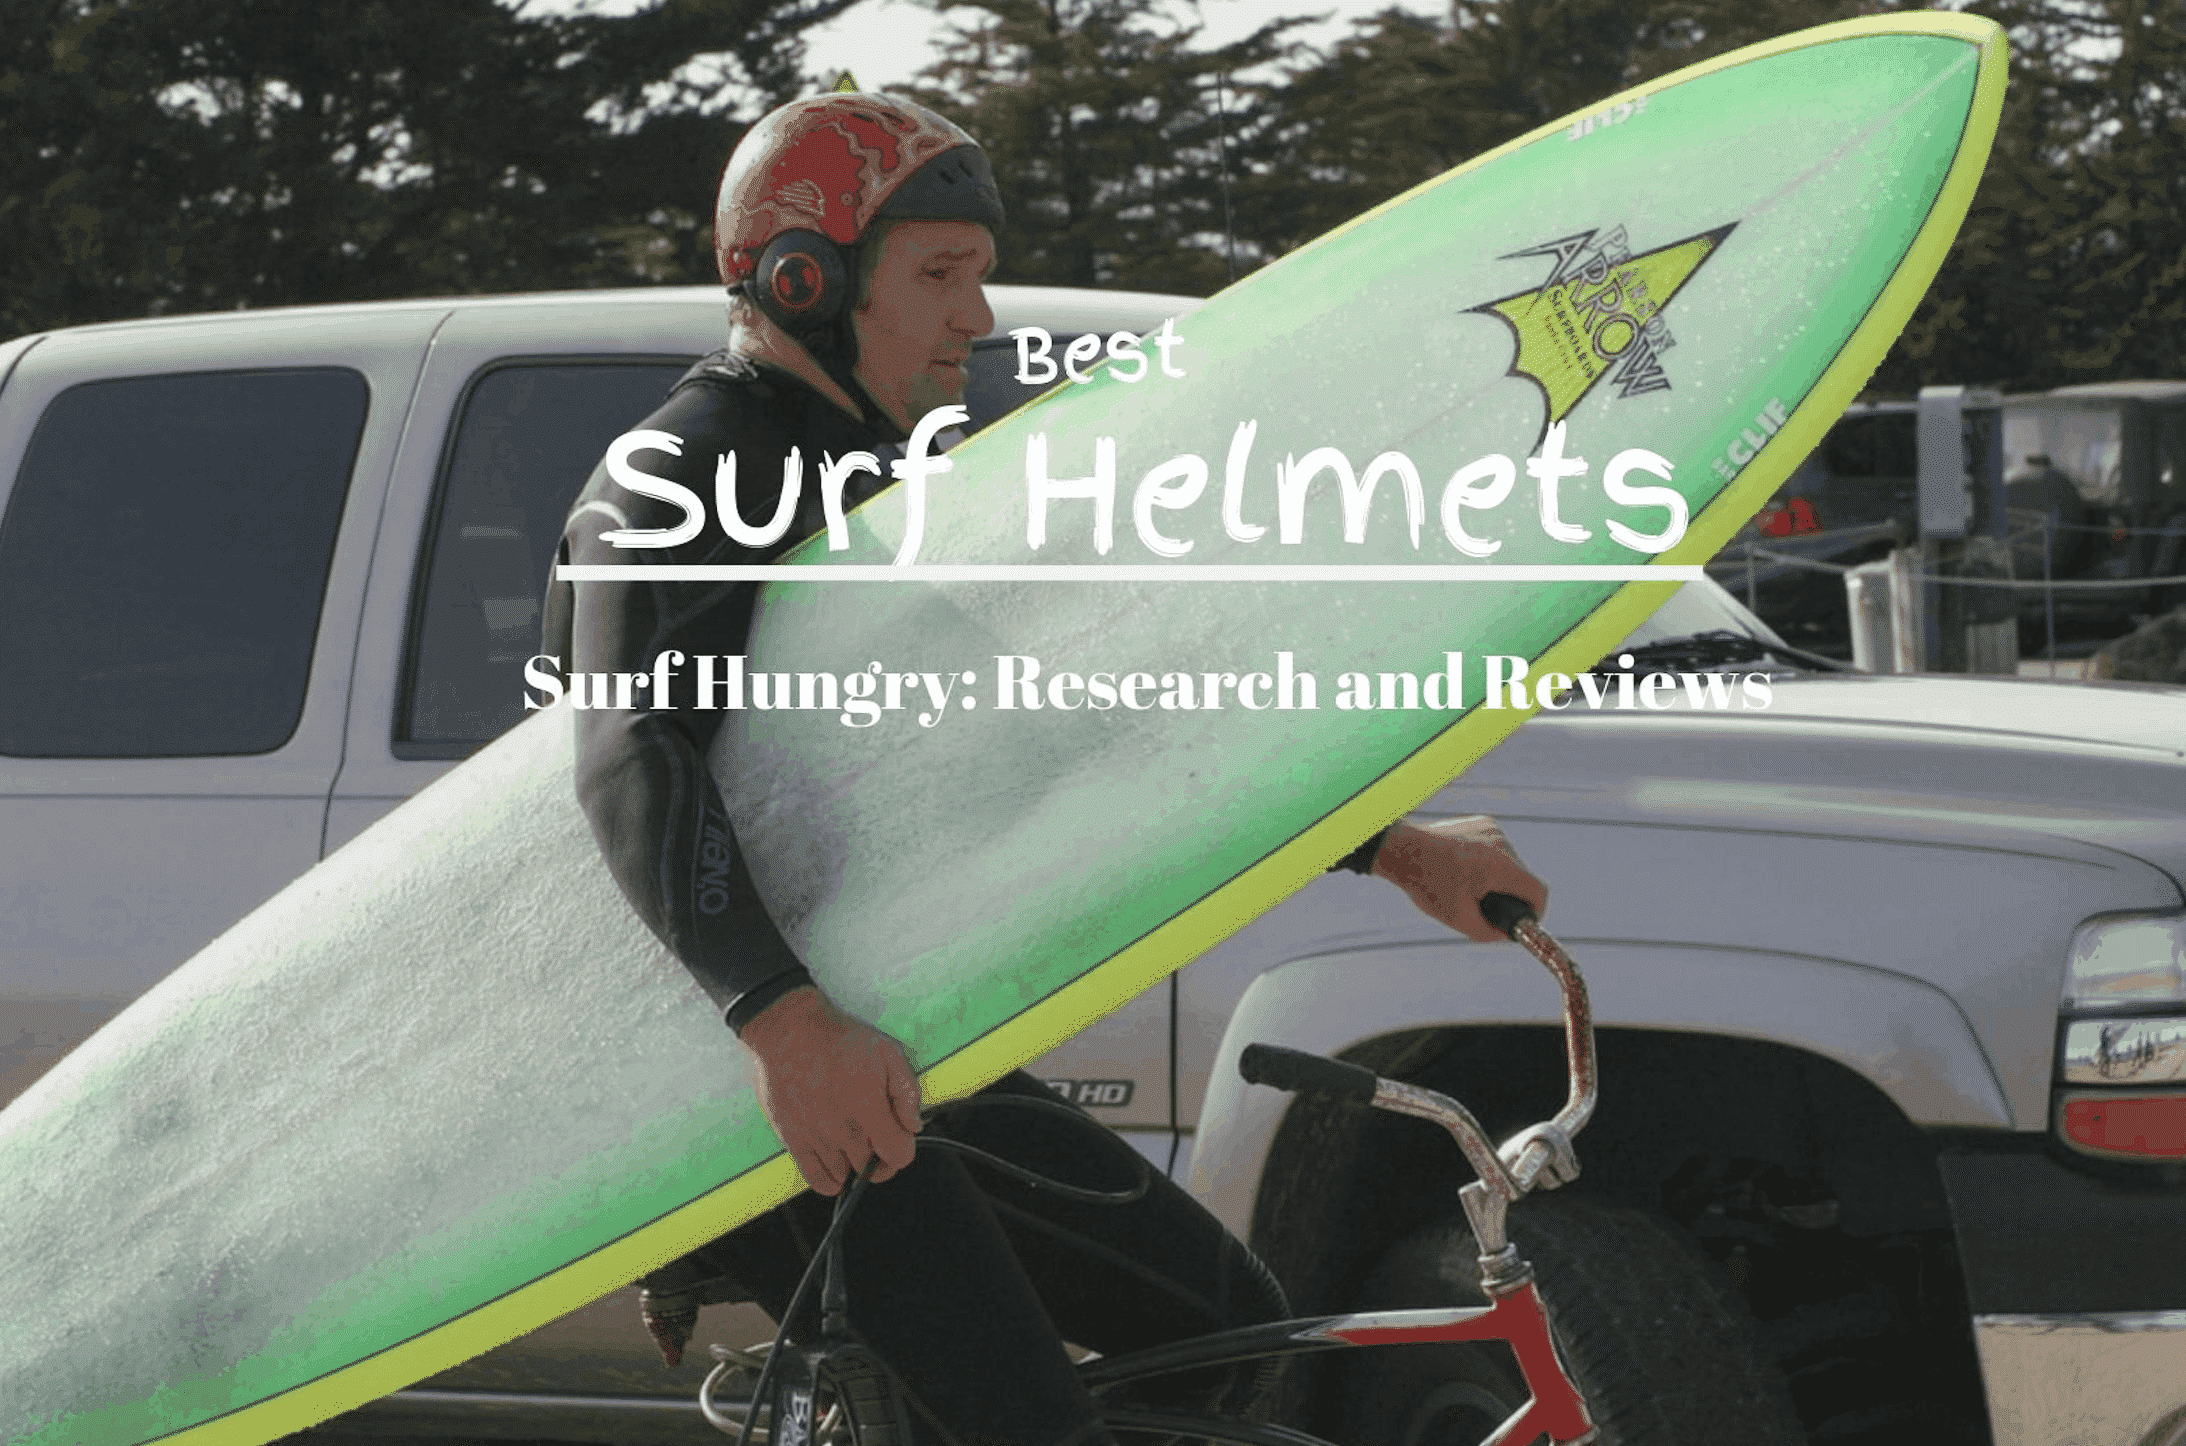 Are surfboards flammable?